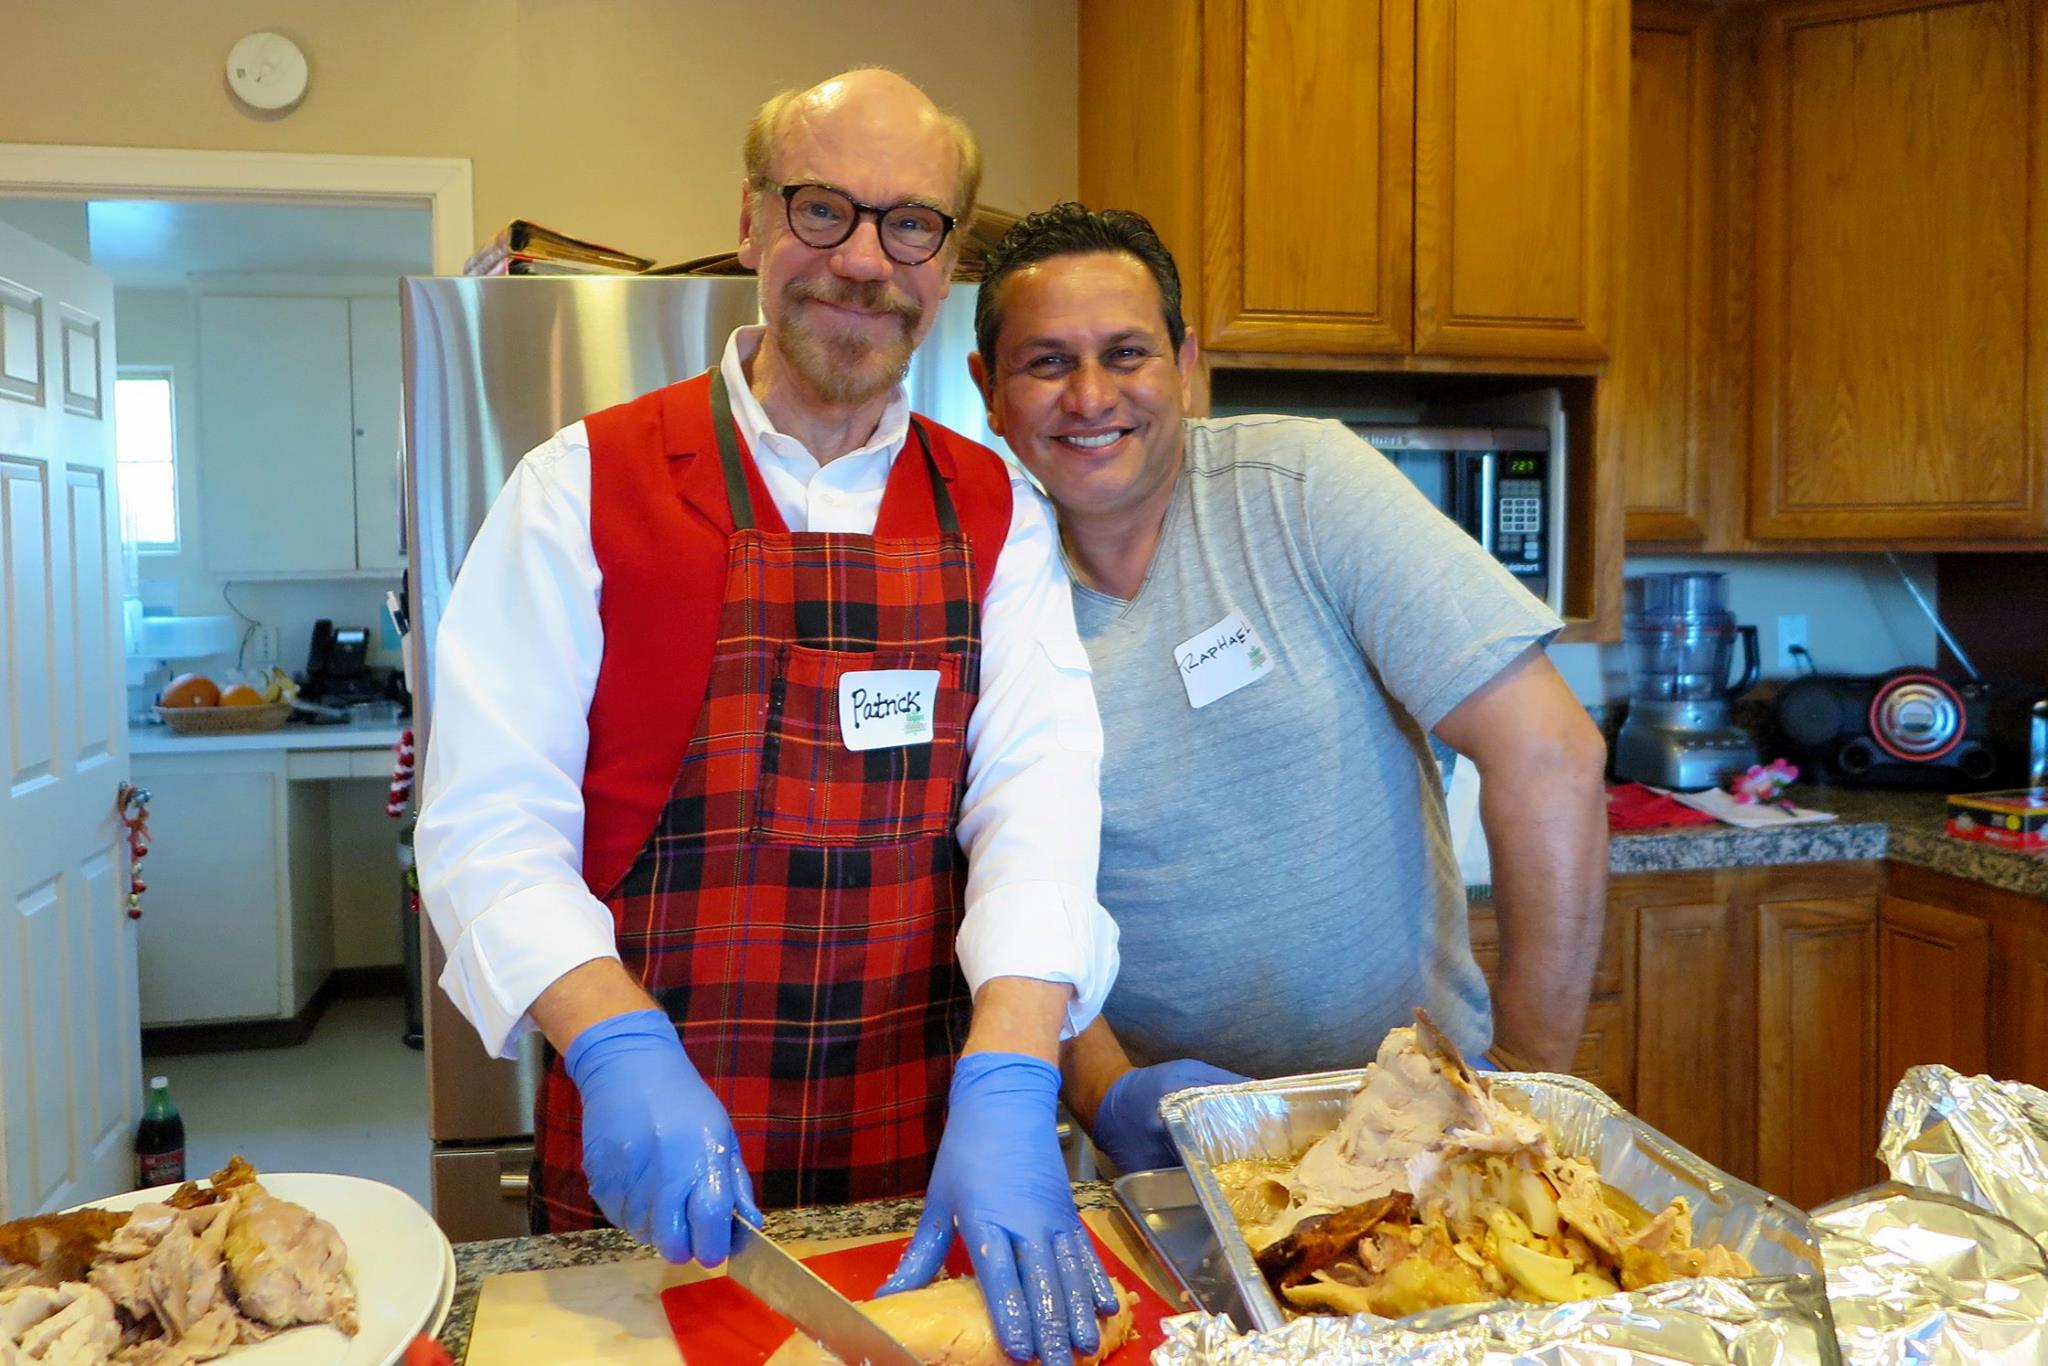 Bring & Serve Dinner for 7 residents at Fraternity House for AIDS/HIV Patients - Wednesday Nights